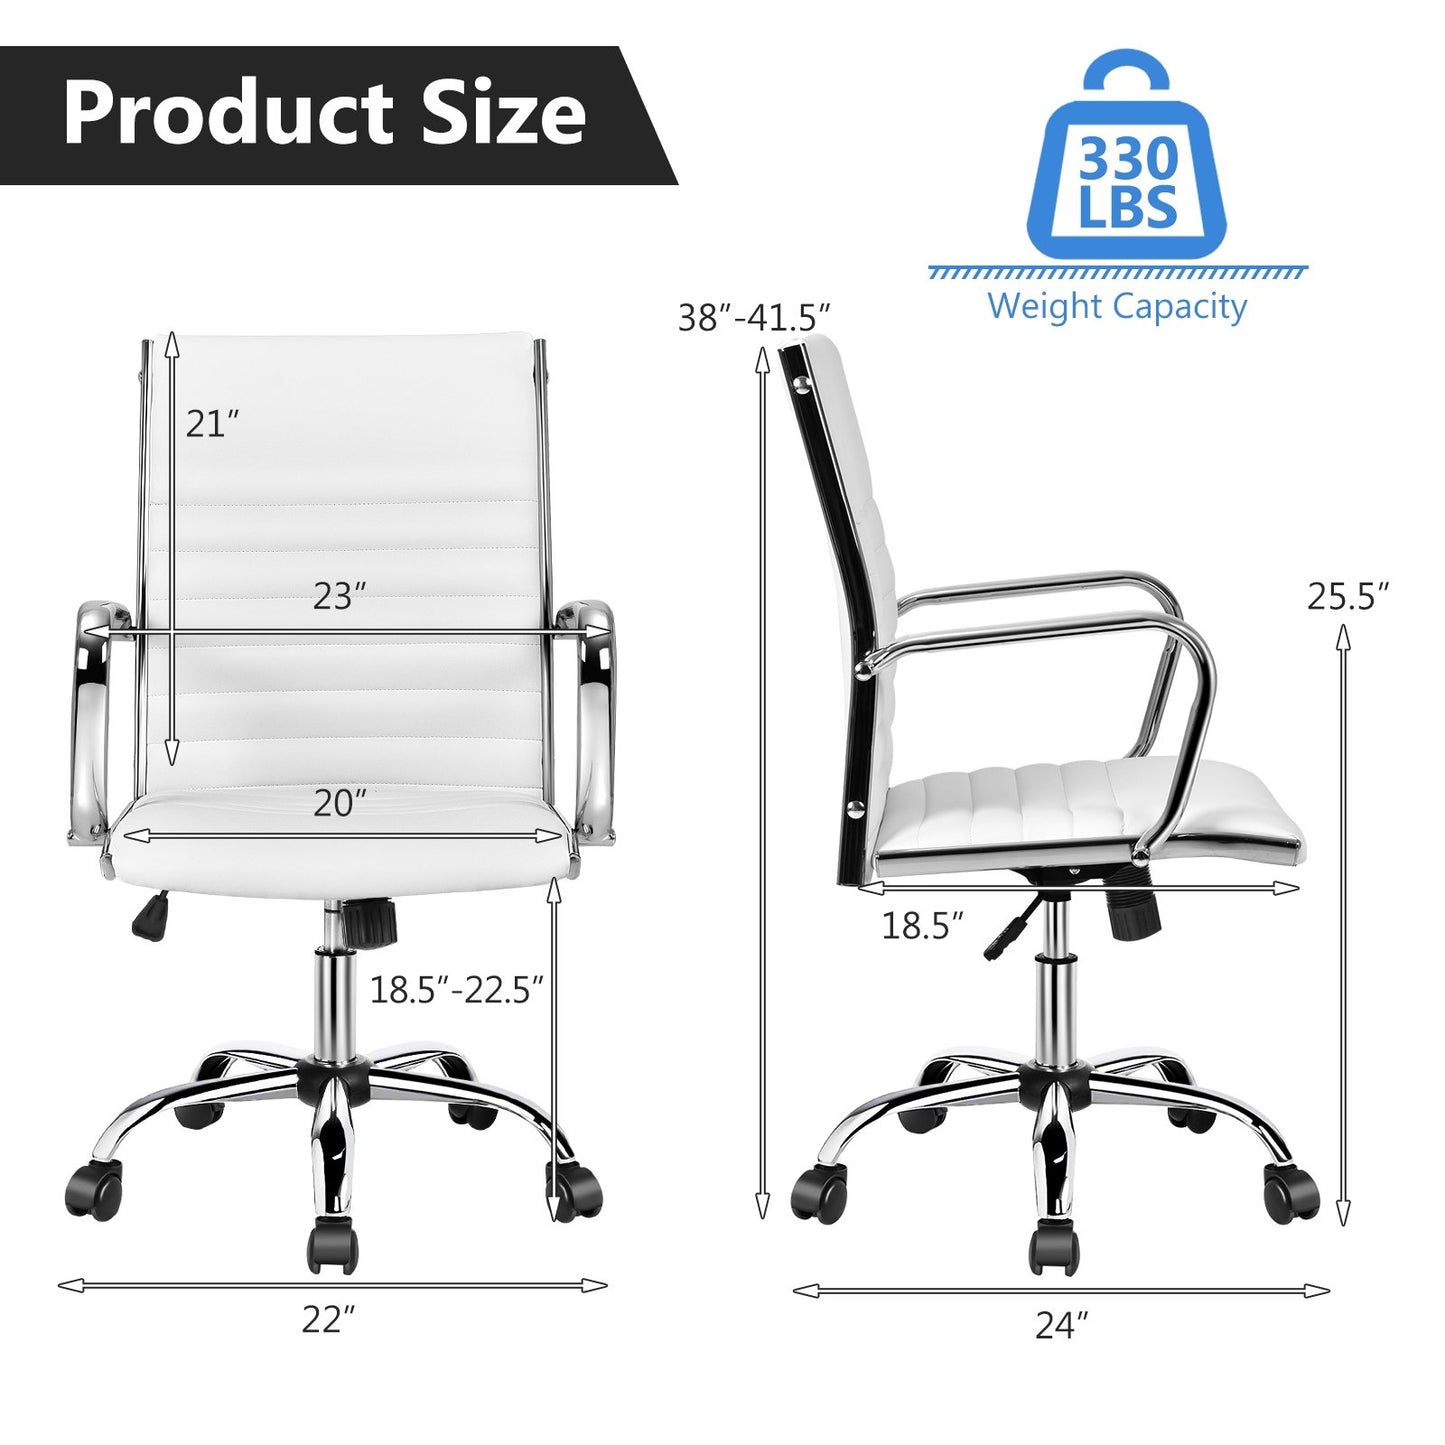 PU Leather Office Chair High Back Conference Task Chair with Armrests, White - Gallery Canada